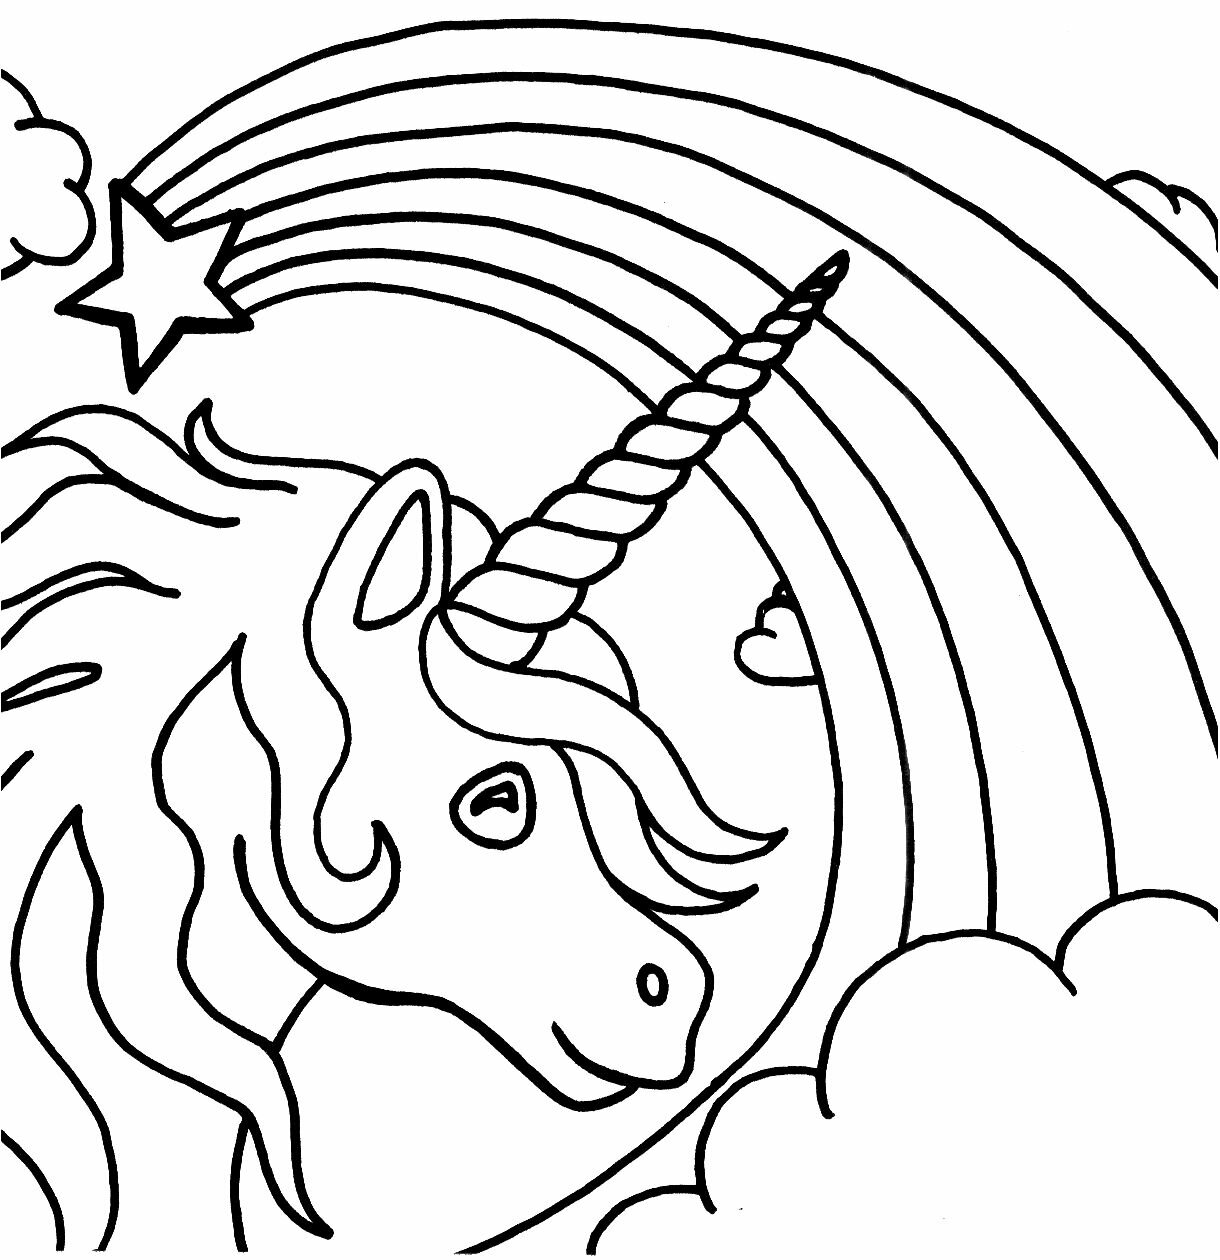 marvelous coloring pages for kids unicorn Ender – free halloween coloring pages for children